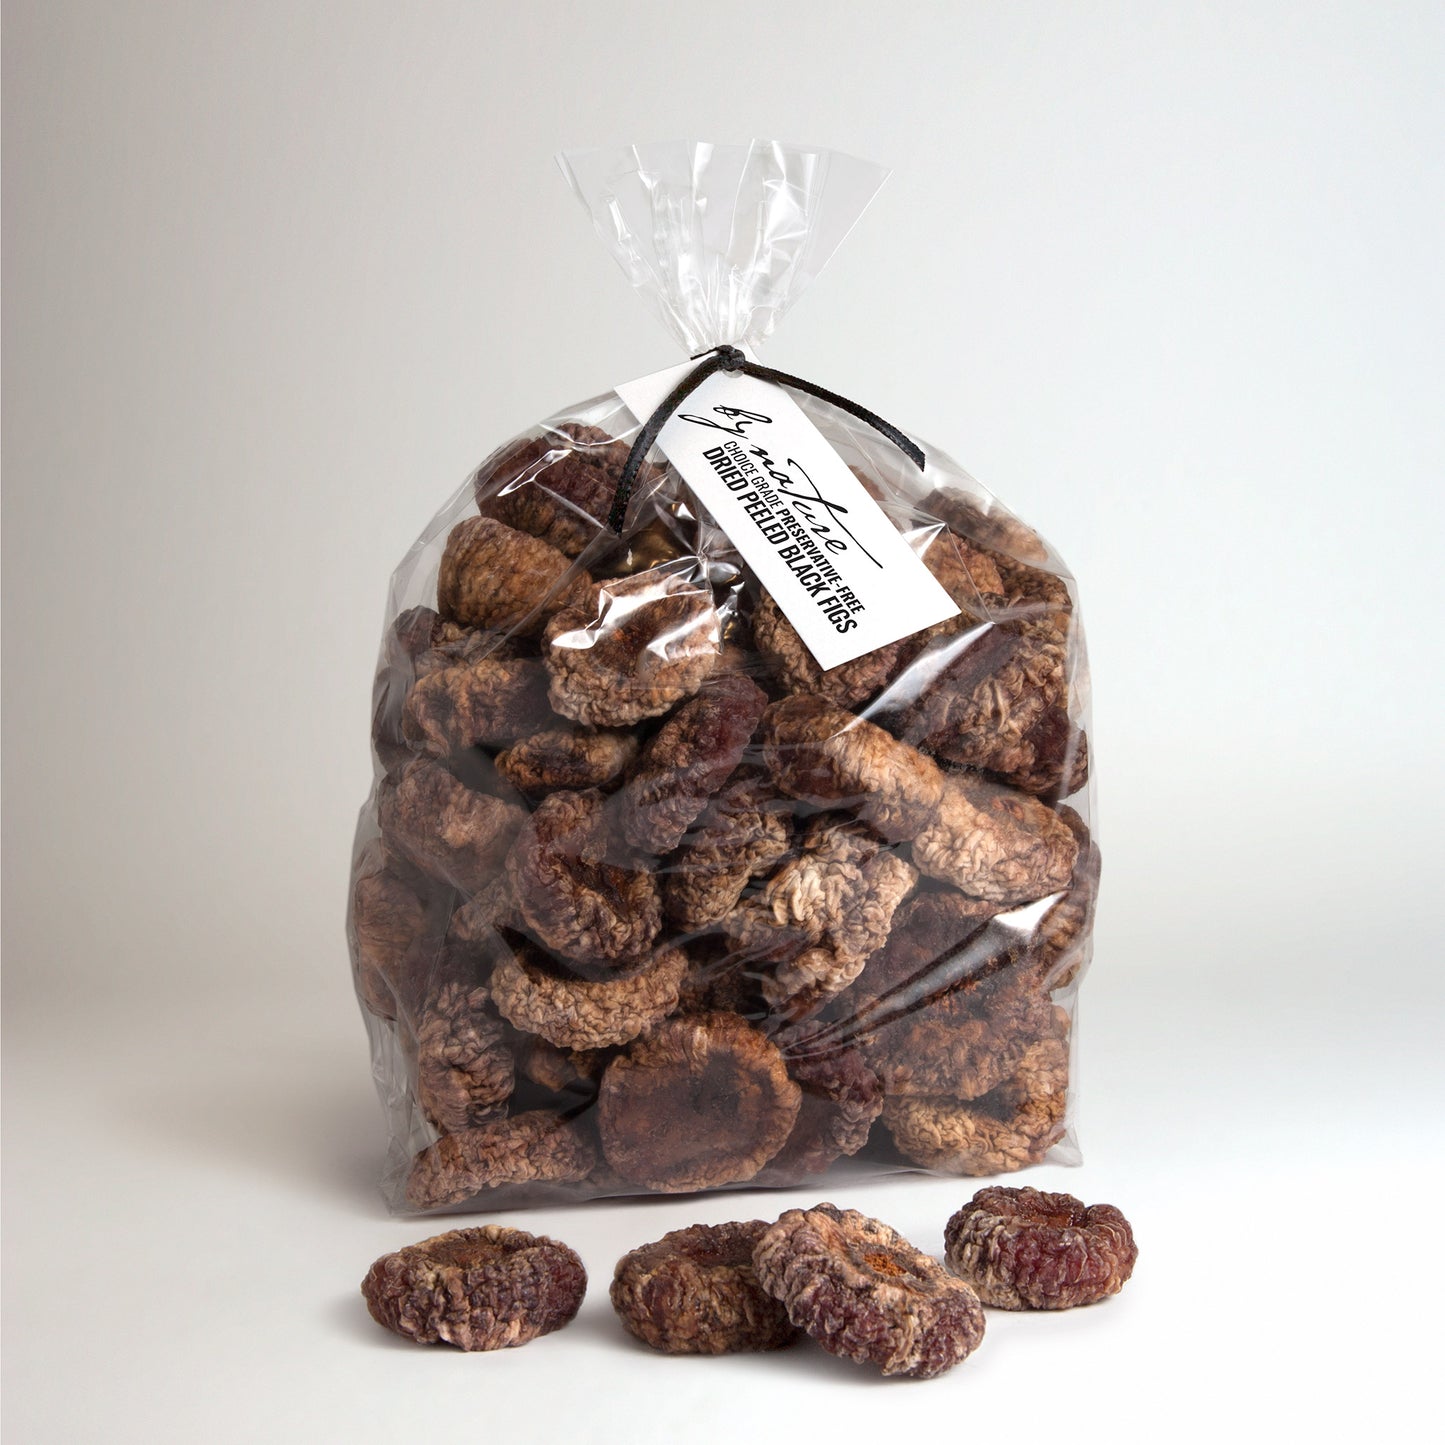 BY NATURE Dried Black Figs, 1kg - peeled, preservative-free.